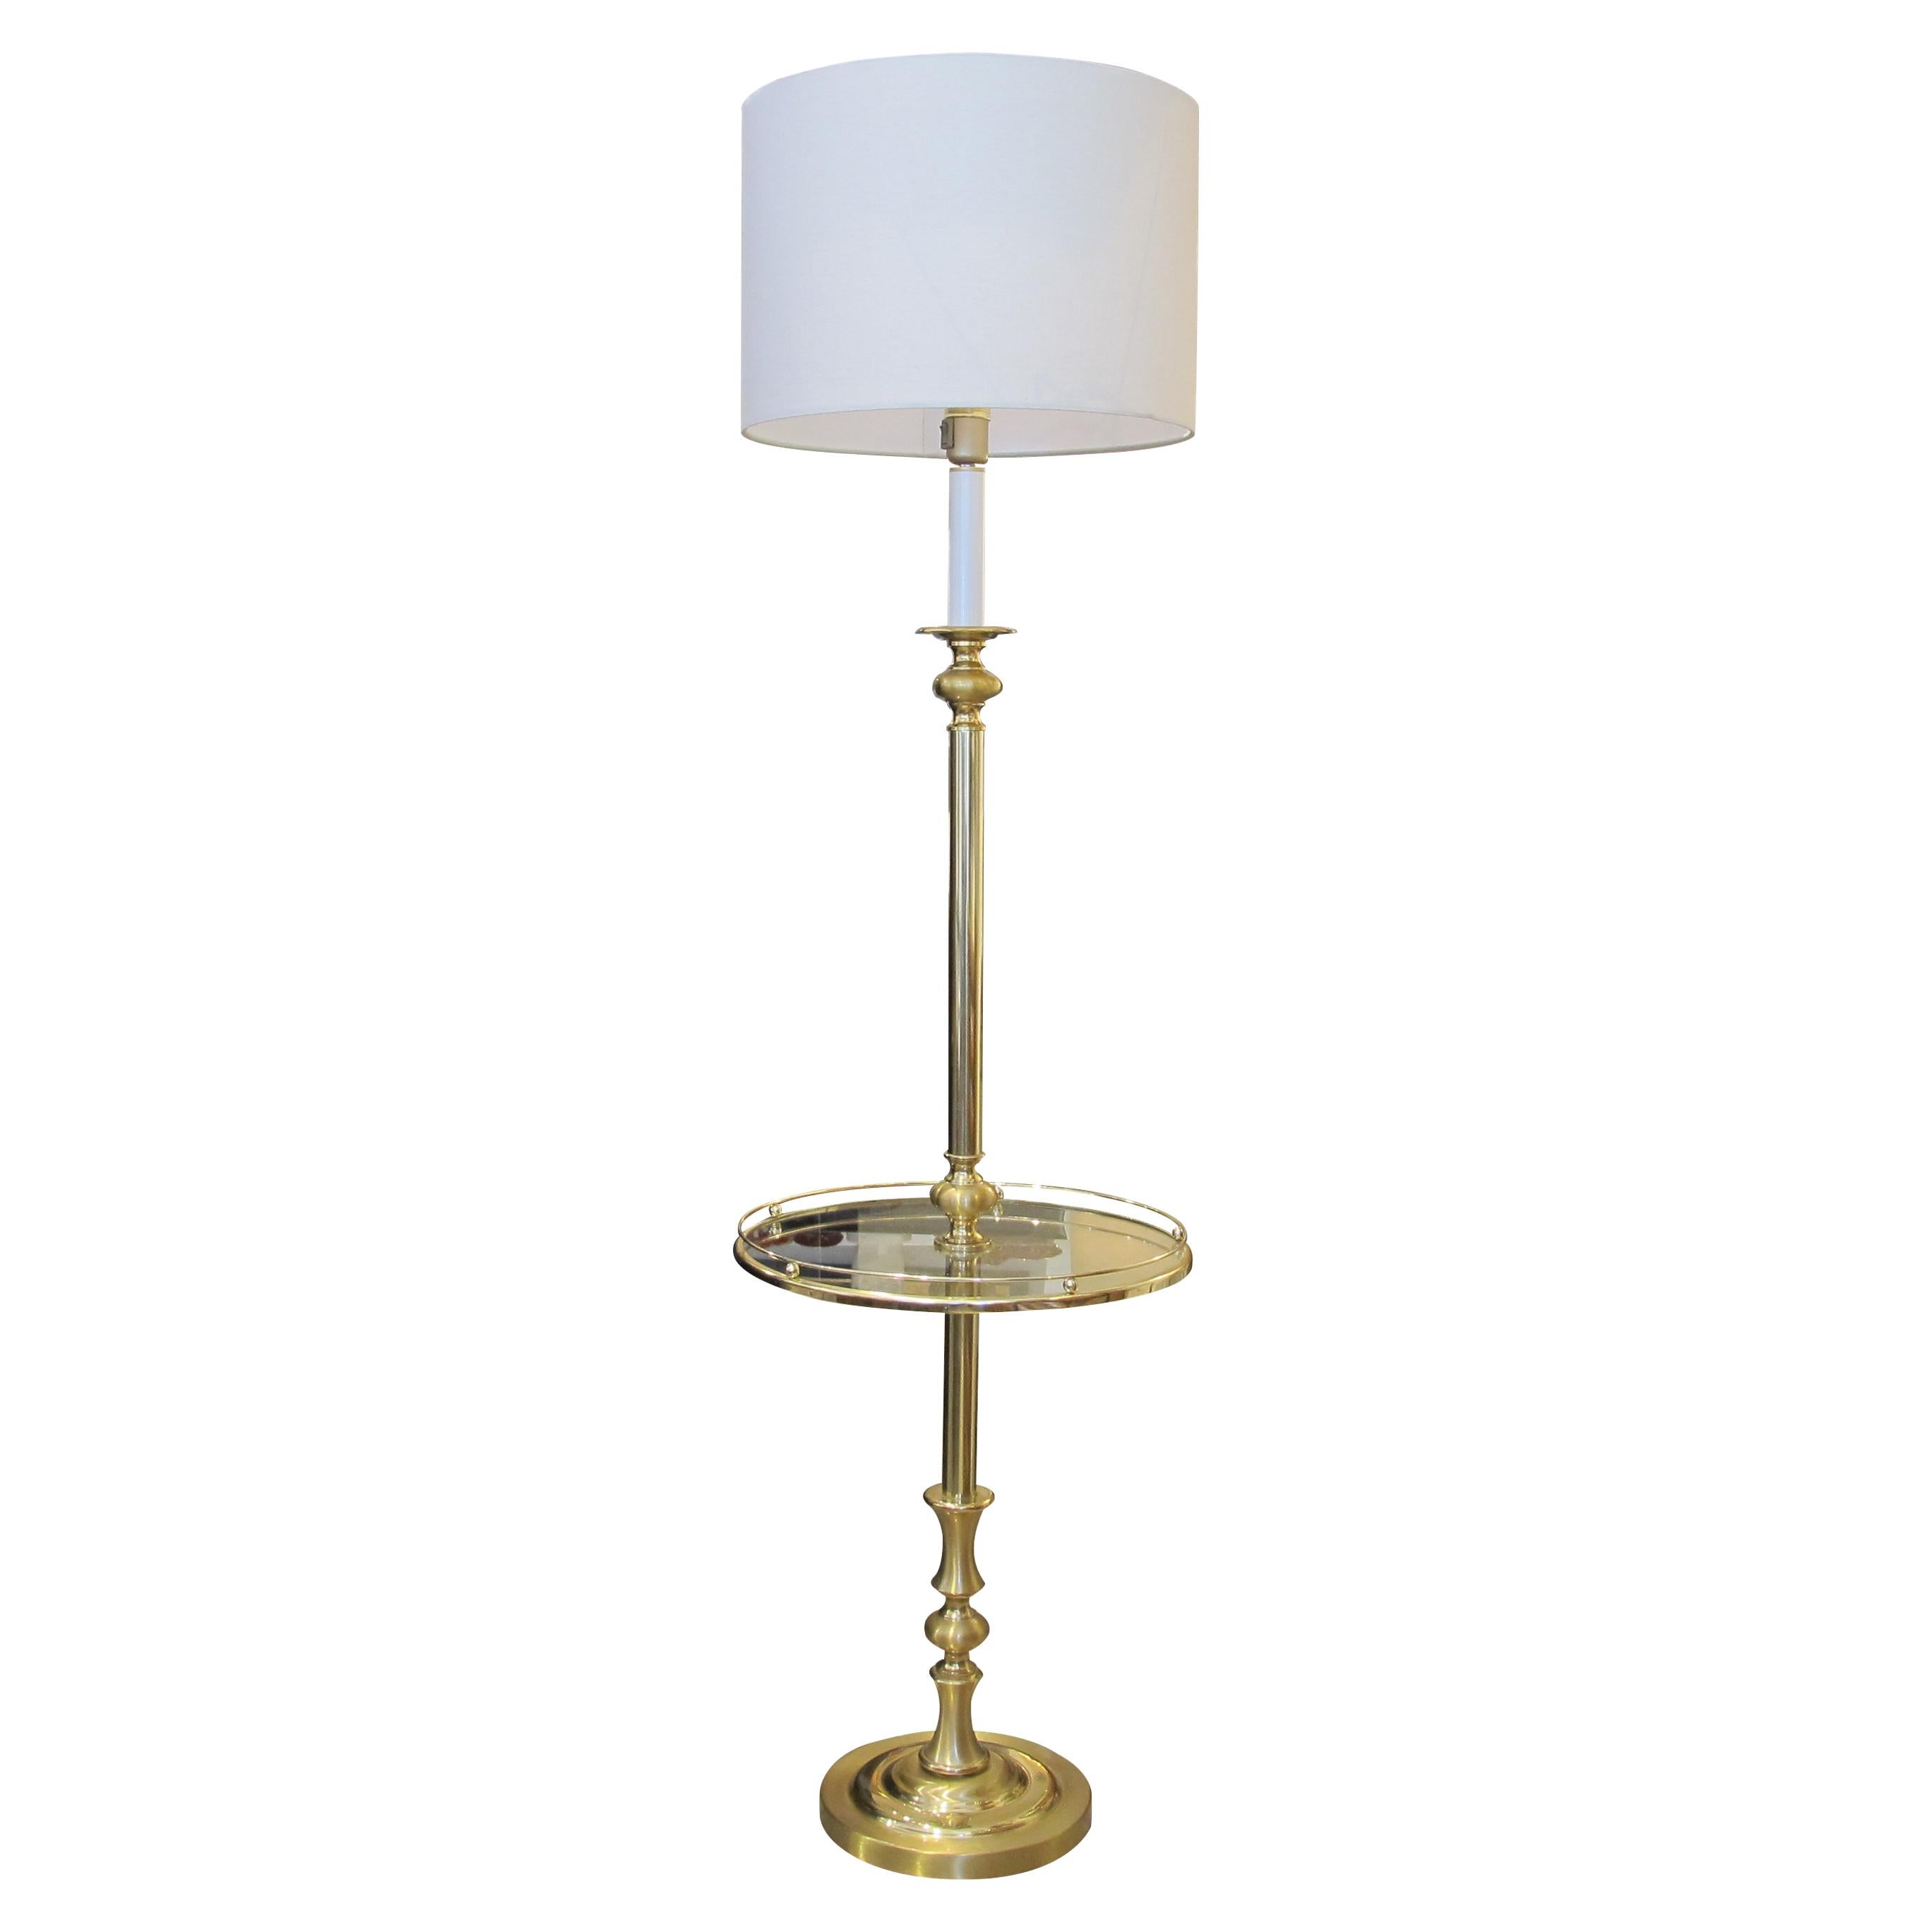 1970s Pair of Brass Floor Lamps with Integrated Side Tables, Swedish In Good Condition For Sale In London, GB